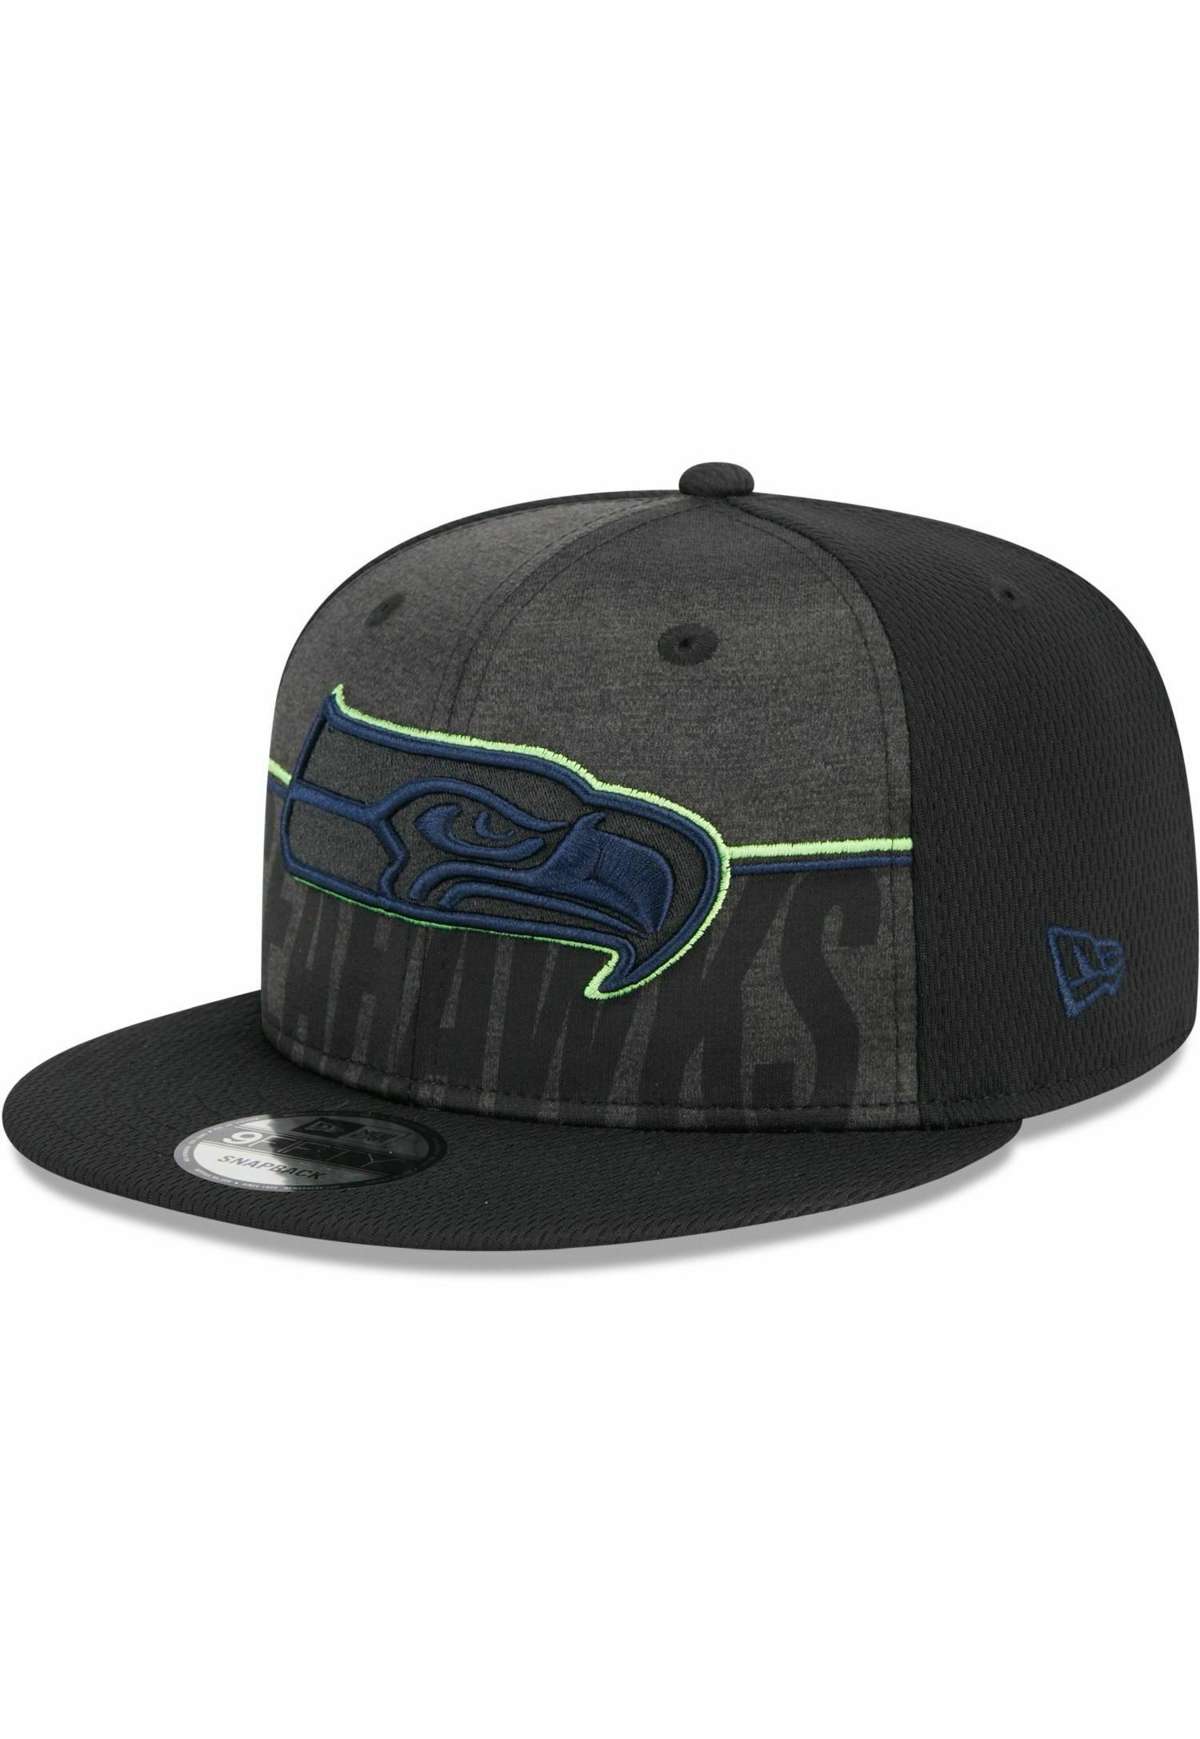 Кепка 9FIFTY TRAINING SEATTLE SEAHAWKS